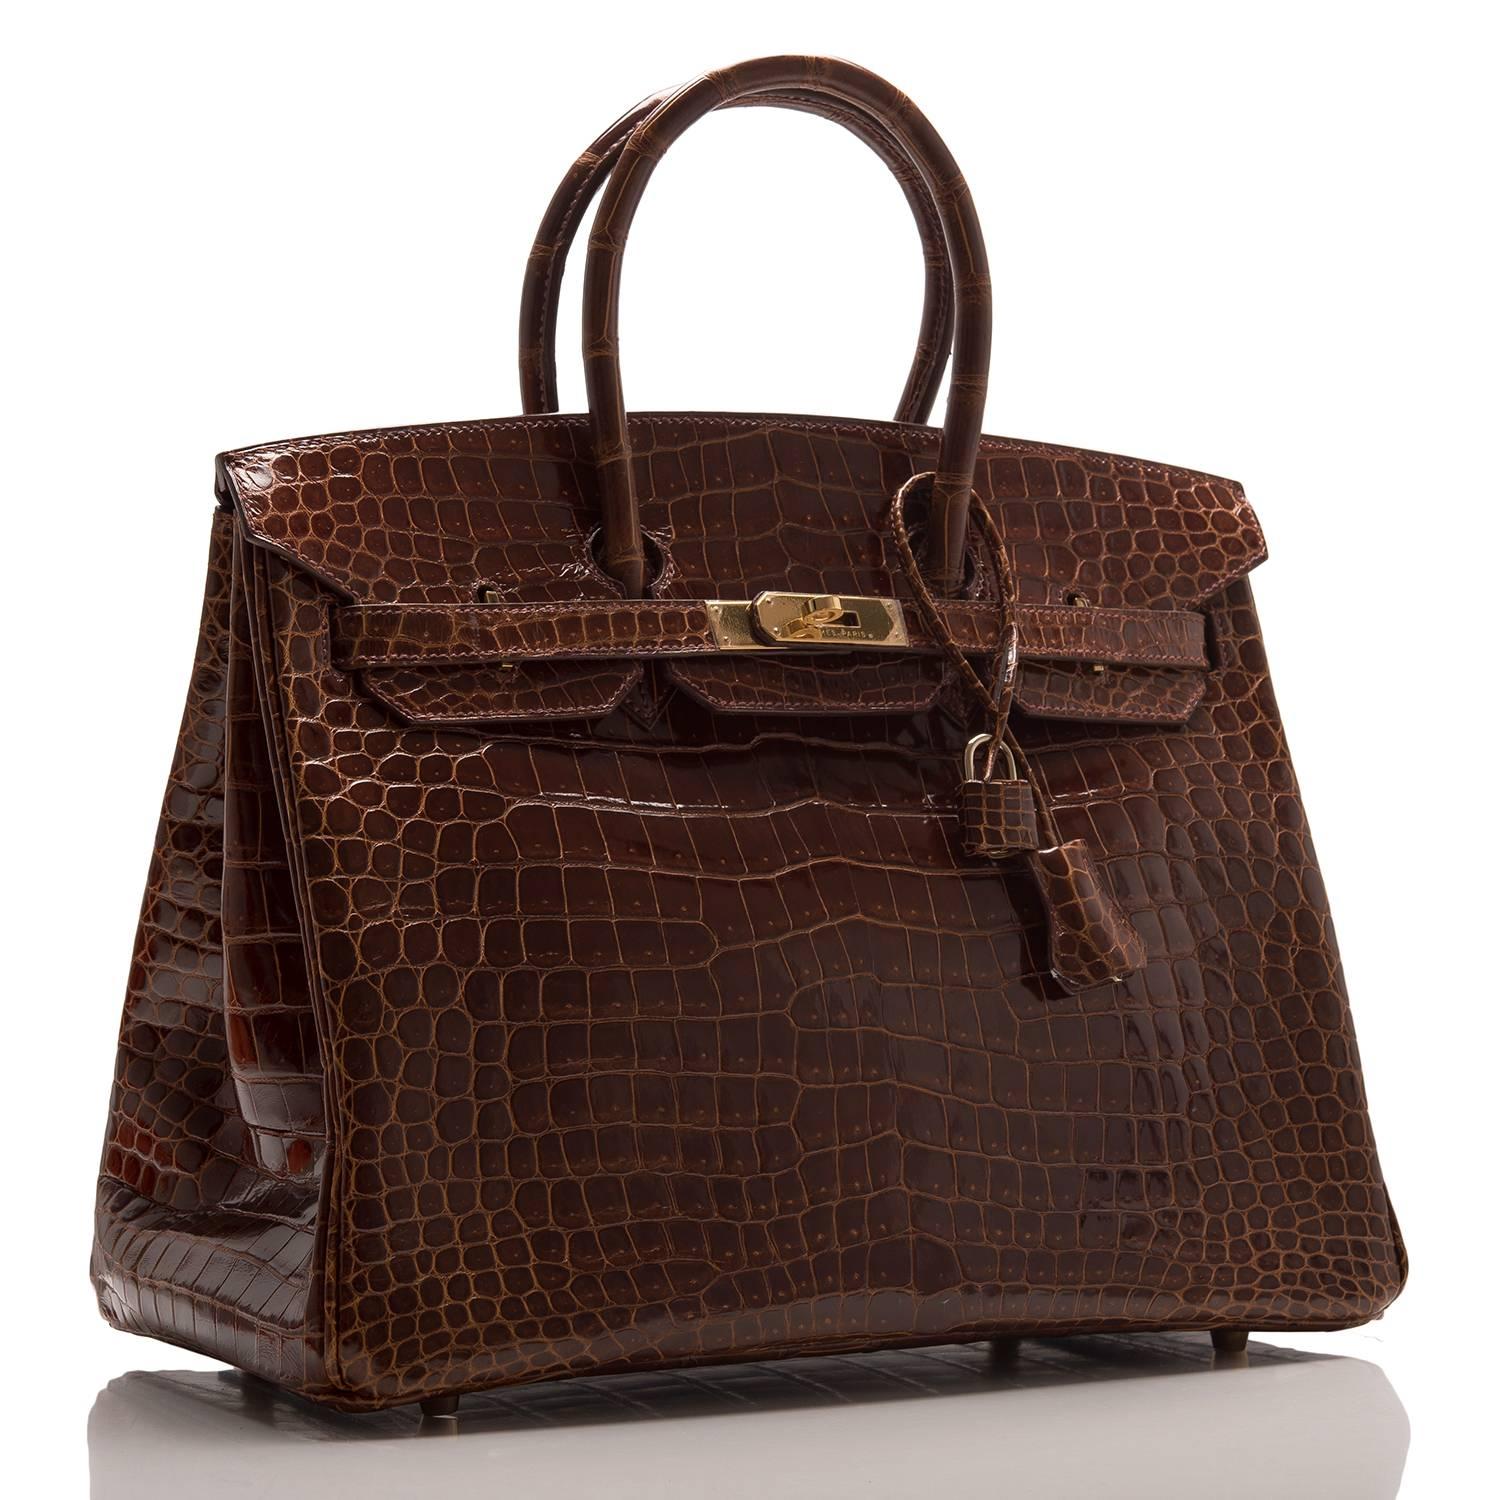 Hermes Cognac Birkin 35cm in shiny porosus crocodile leather with gold hardware.

This Birkin features tonal stitching, front toggle closure, clochette with lock and two keys, and double rolled handles.

The interior is lined in Cognac chevre